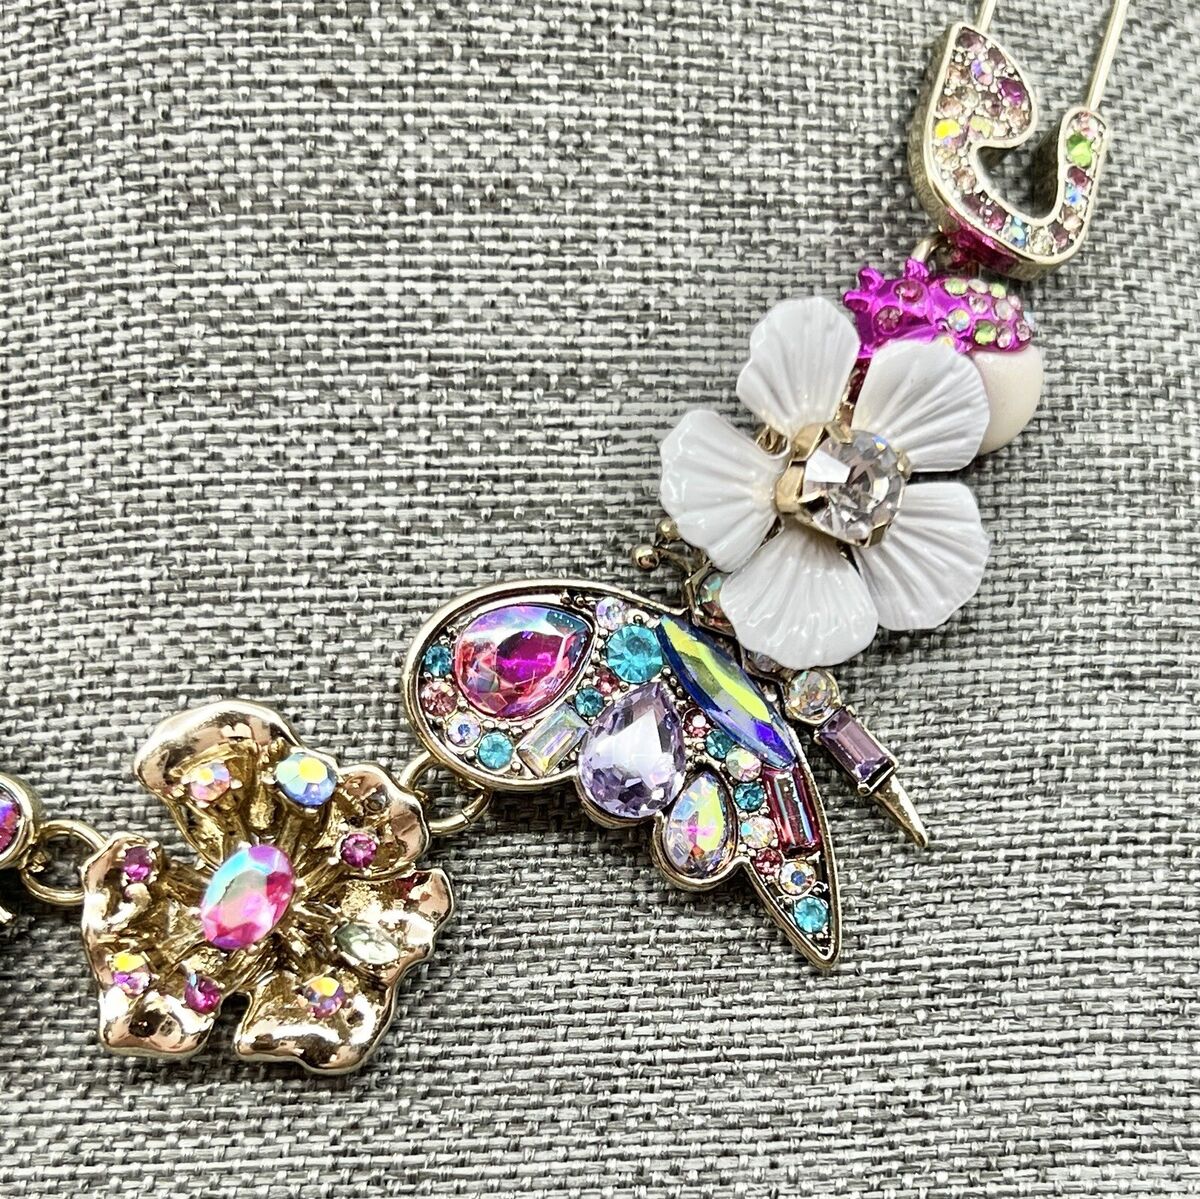 Betsey Johnson 'Blooming Betsey' Necklace & Earring Set NWT/HTF